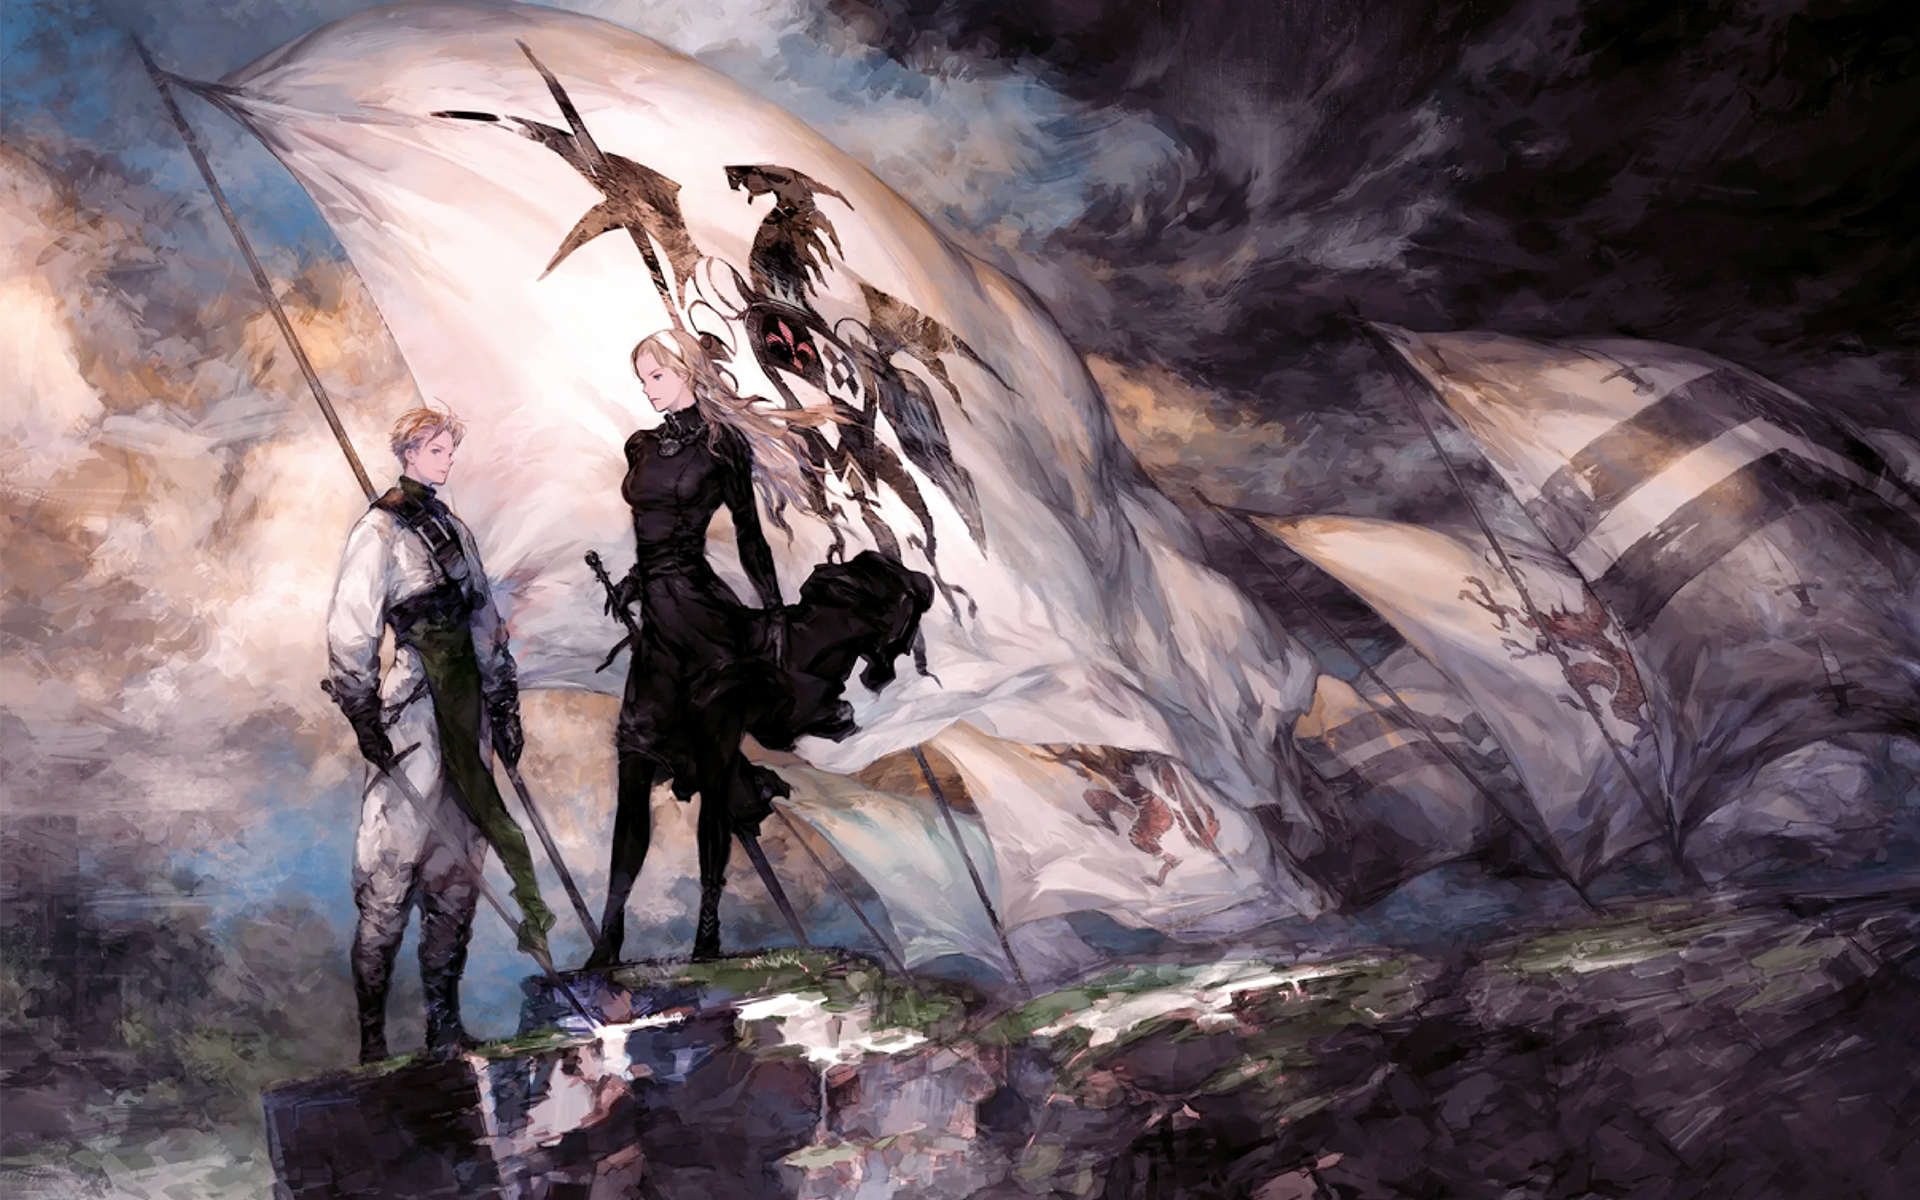 Artwork from Tactics Ogre: Reborn, featuring a male and female character standing among flags